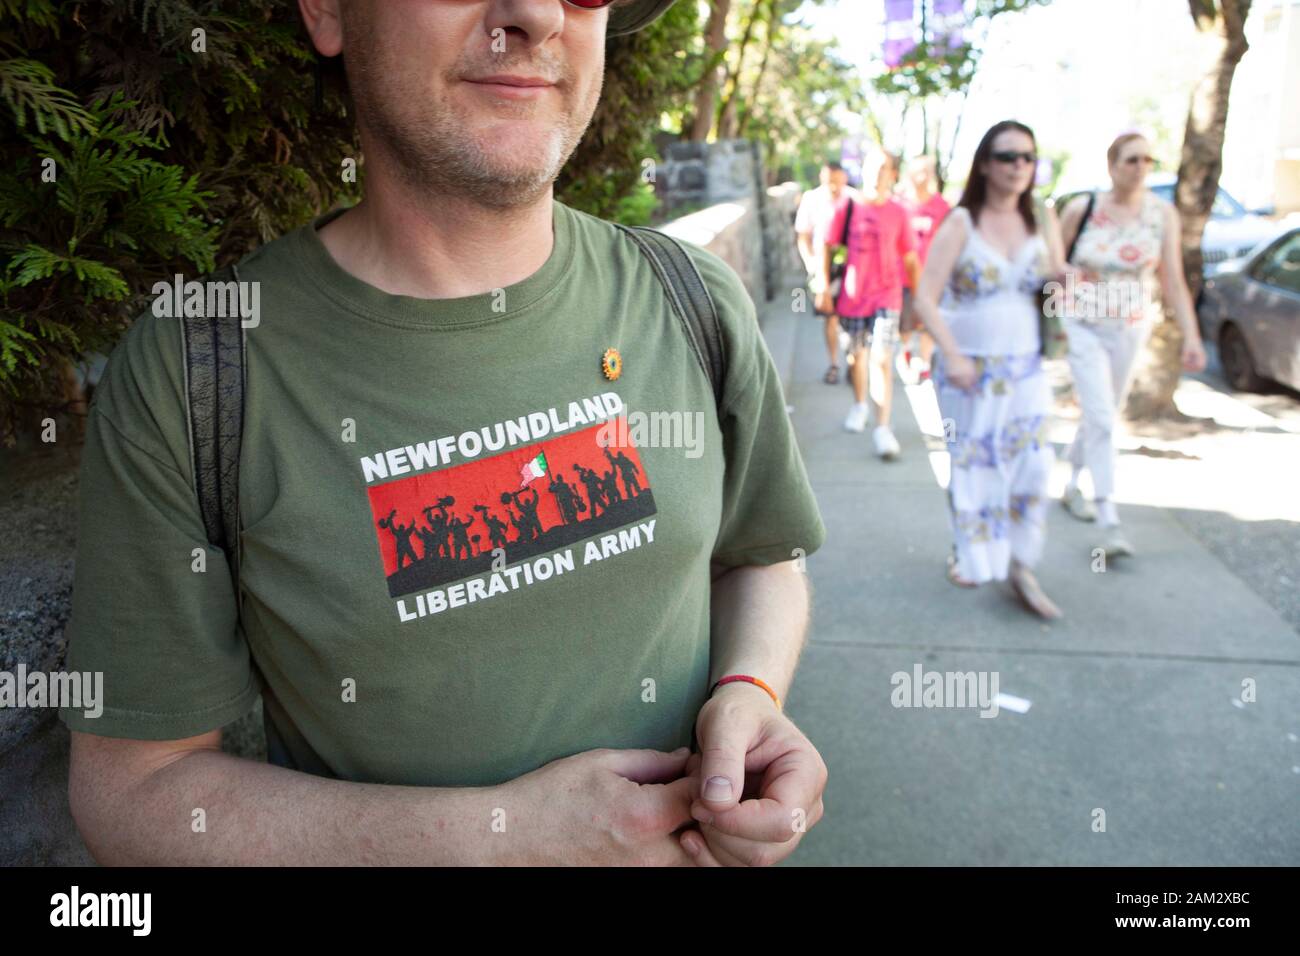 Man wearing t-shirt with slogan on way to Pride parade, Vancouver Pride Festival 2014, Vancouver, Canada Stock Photo